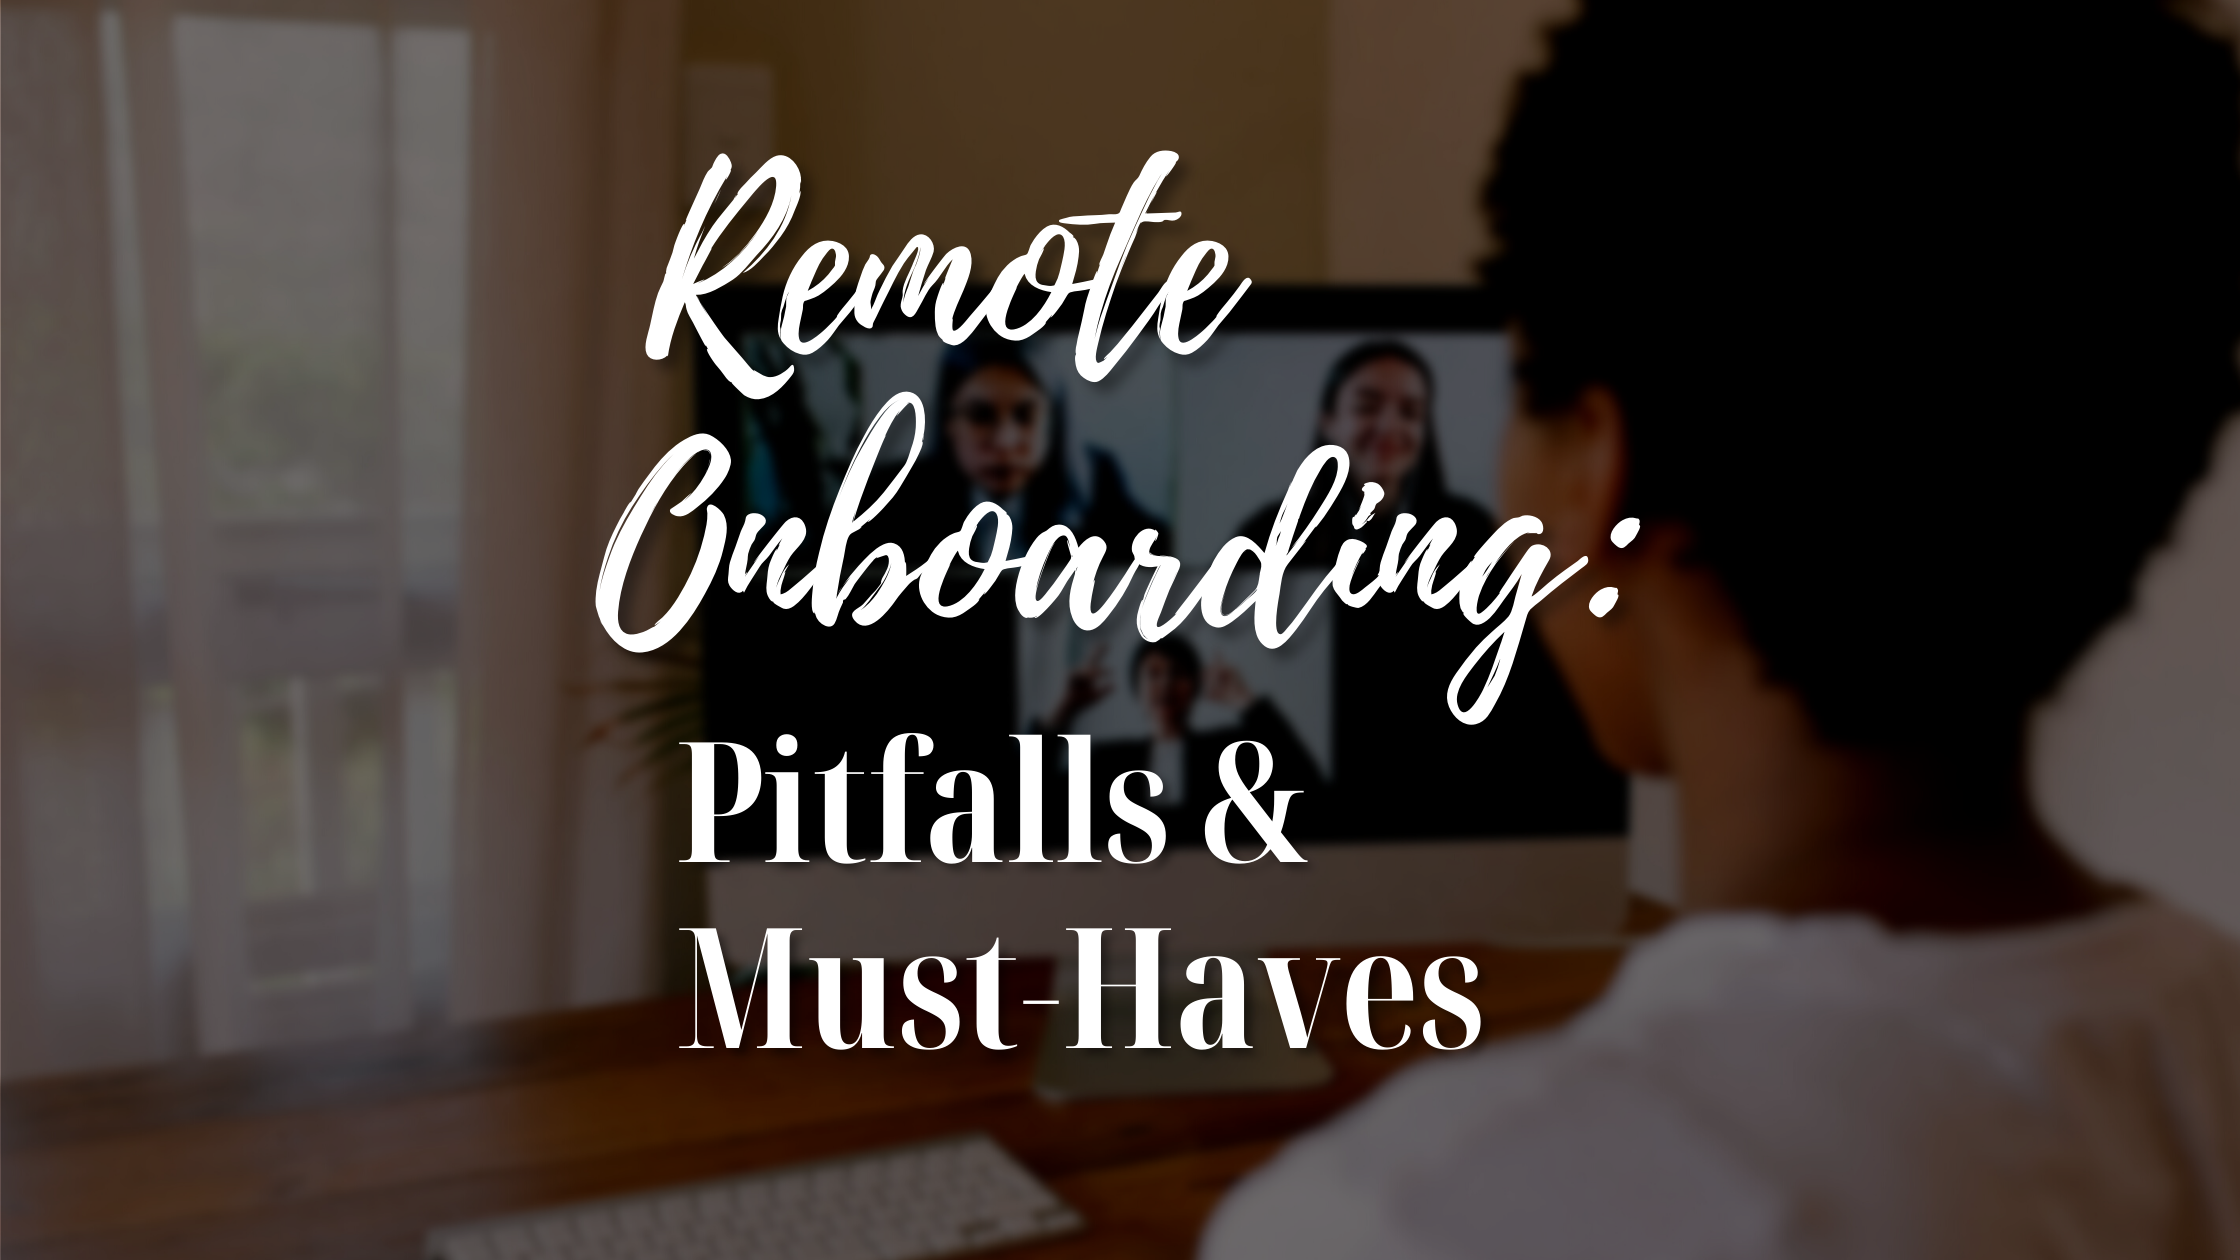 Remote Onboarding: Pitfalls & Must-Haves